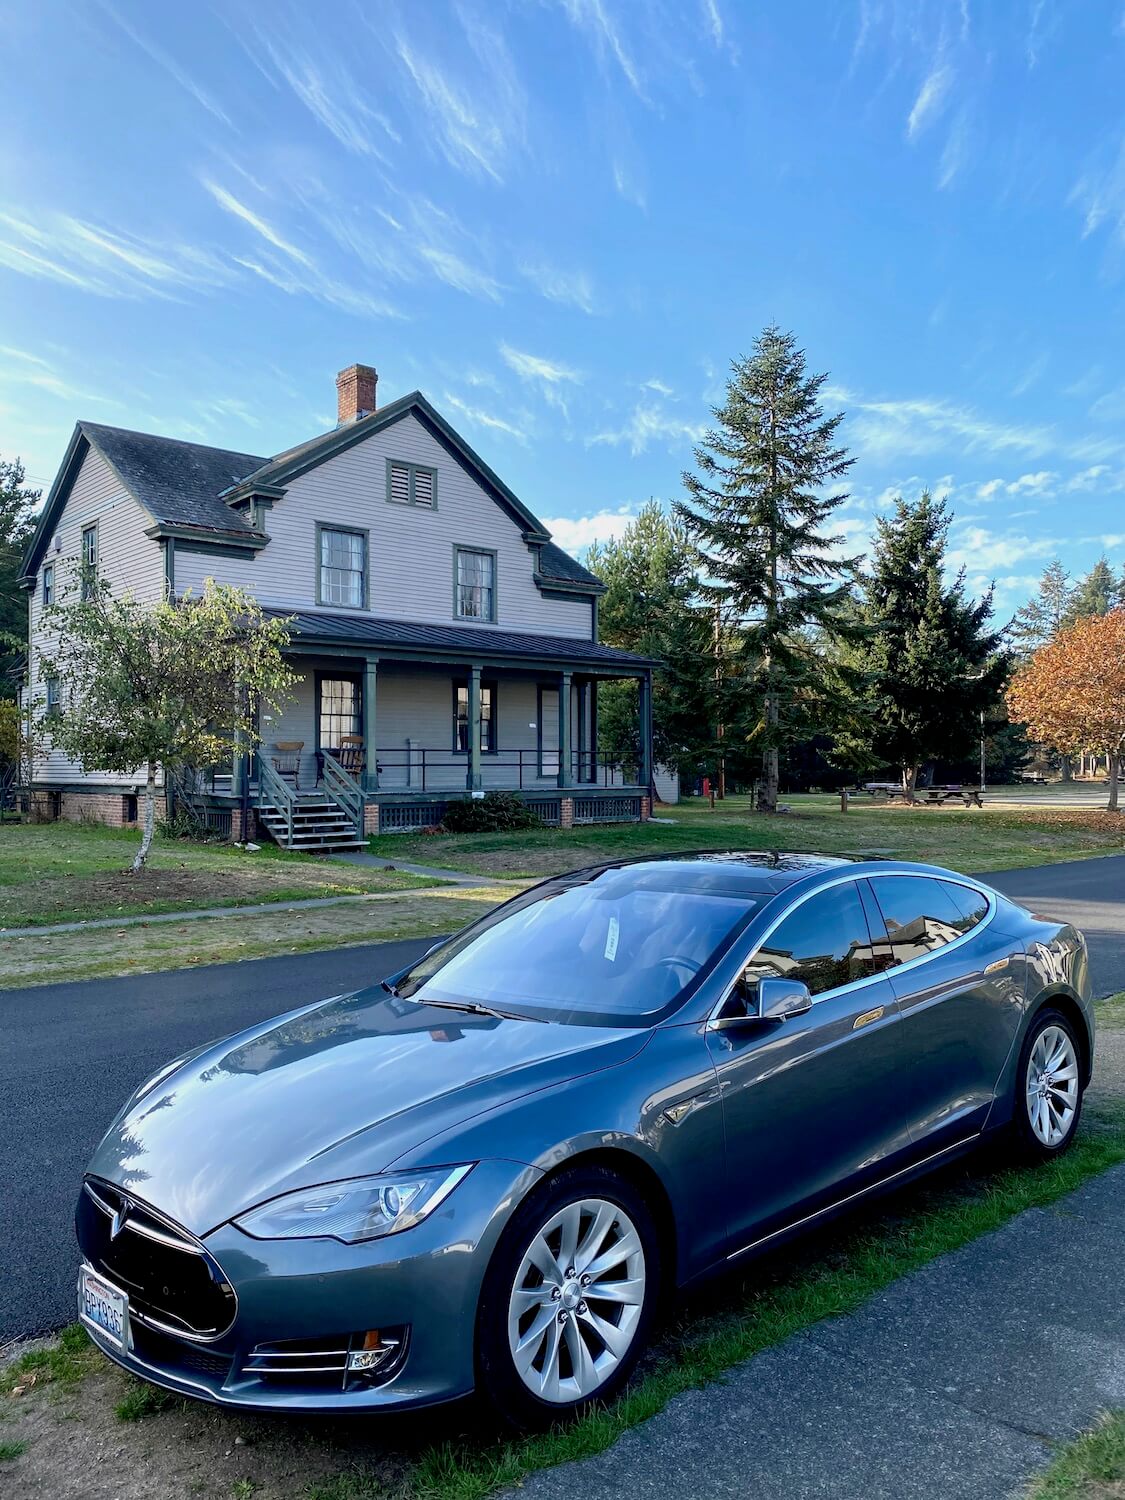 A Tesla is parked on a paved street across from a historic officer home on the grounds of Fort Worden State Park. The house is painted pink with olive green trim and the sky is blue above.  